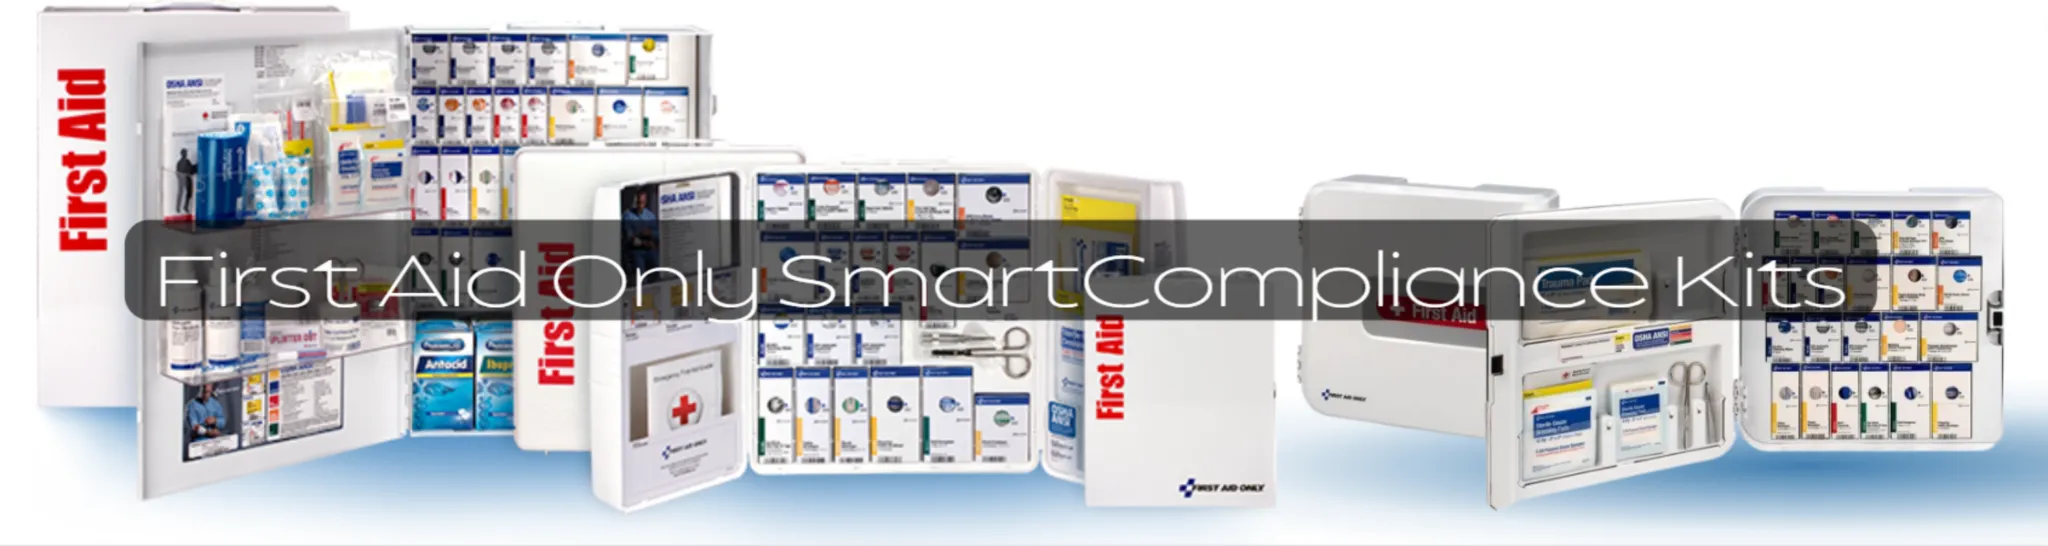 First-aid-Only-SmartCompliance-Banner-3-2048x546